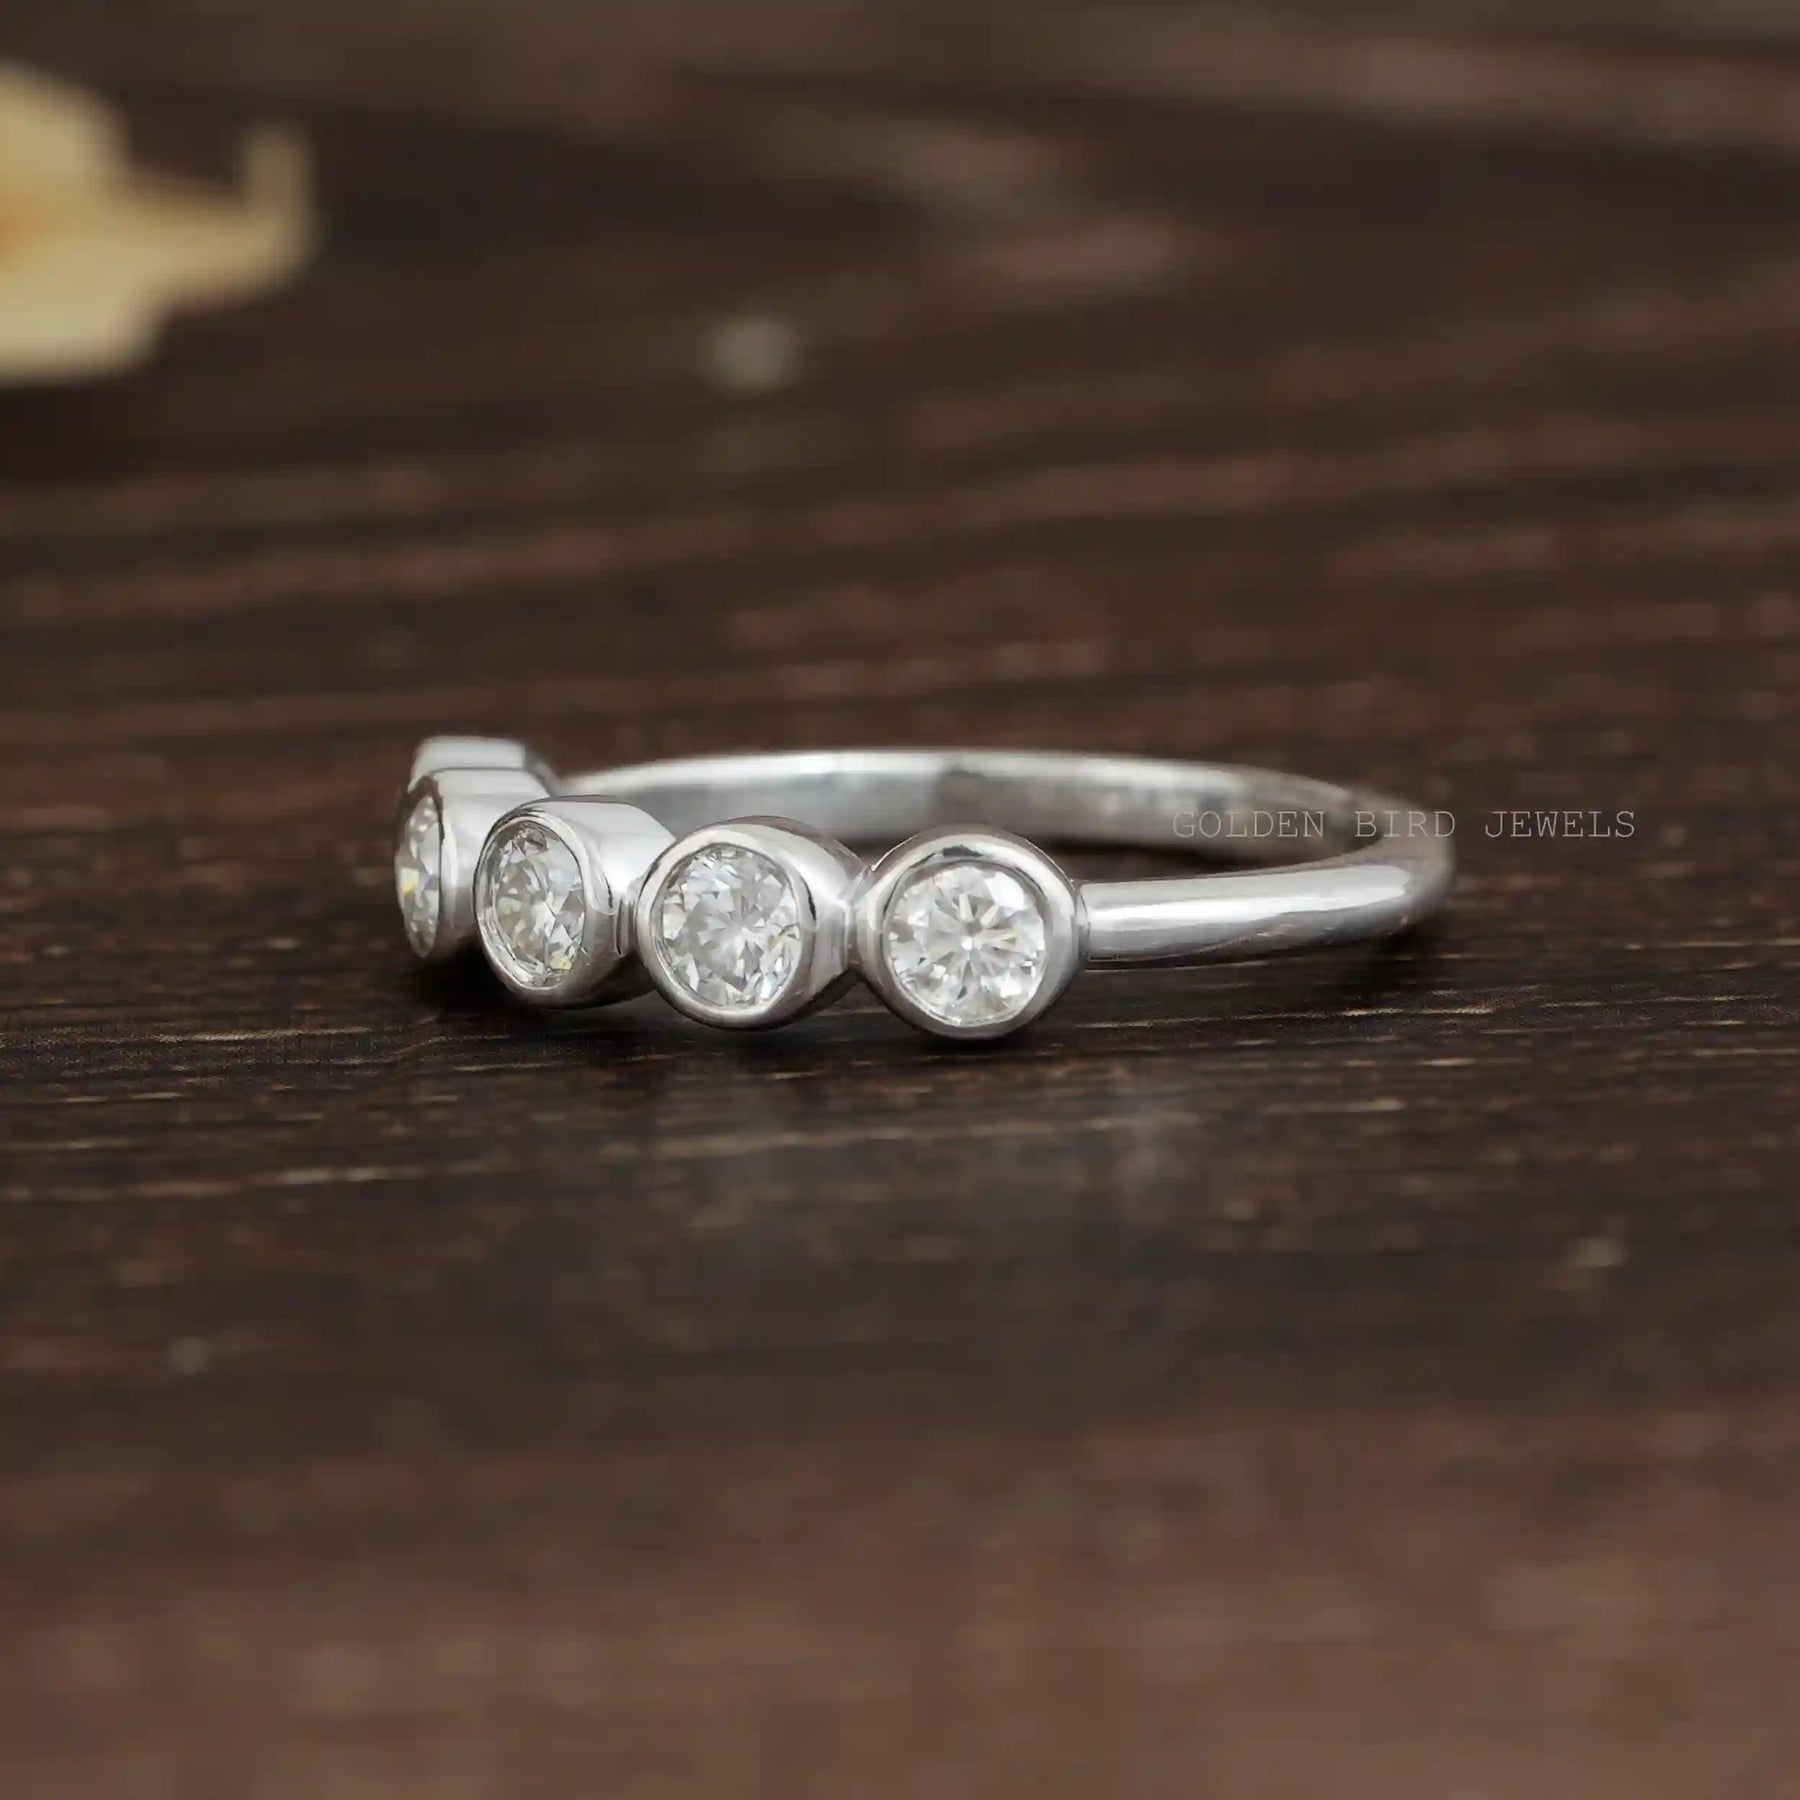 [Side view of round cut moissanite 5 stone ring in 14k white gold]-[Golden Bird Jewels]